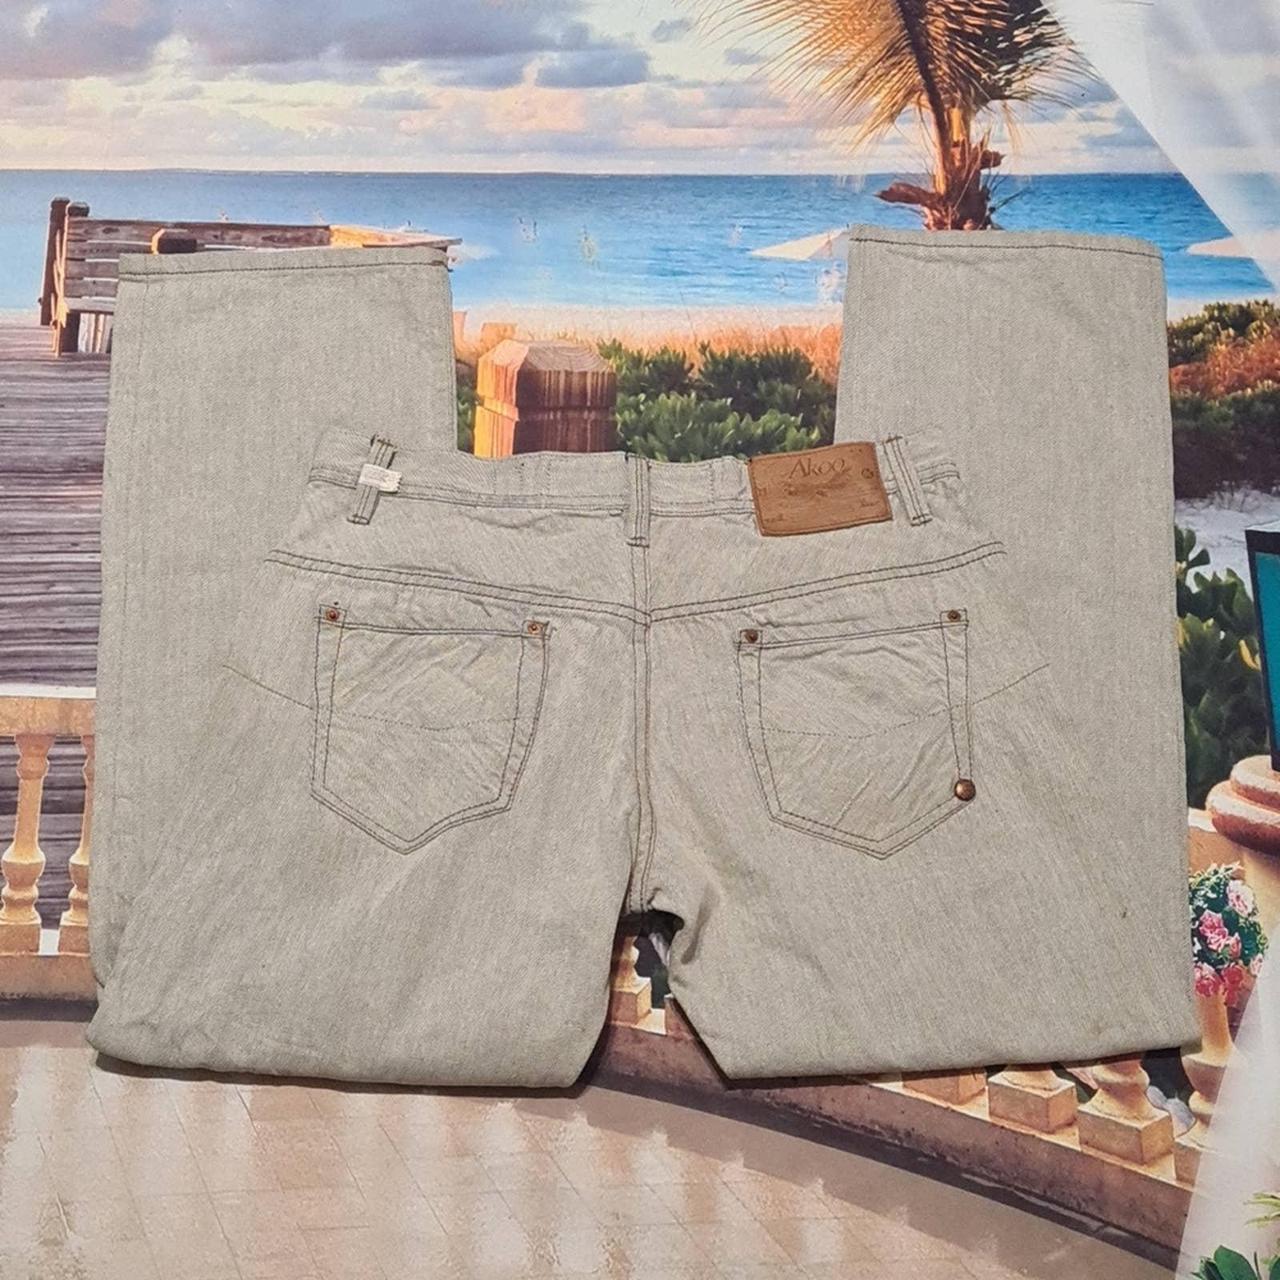 Product Image 4 - Akoo Beige Jeans Size 32x31

*tag